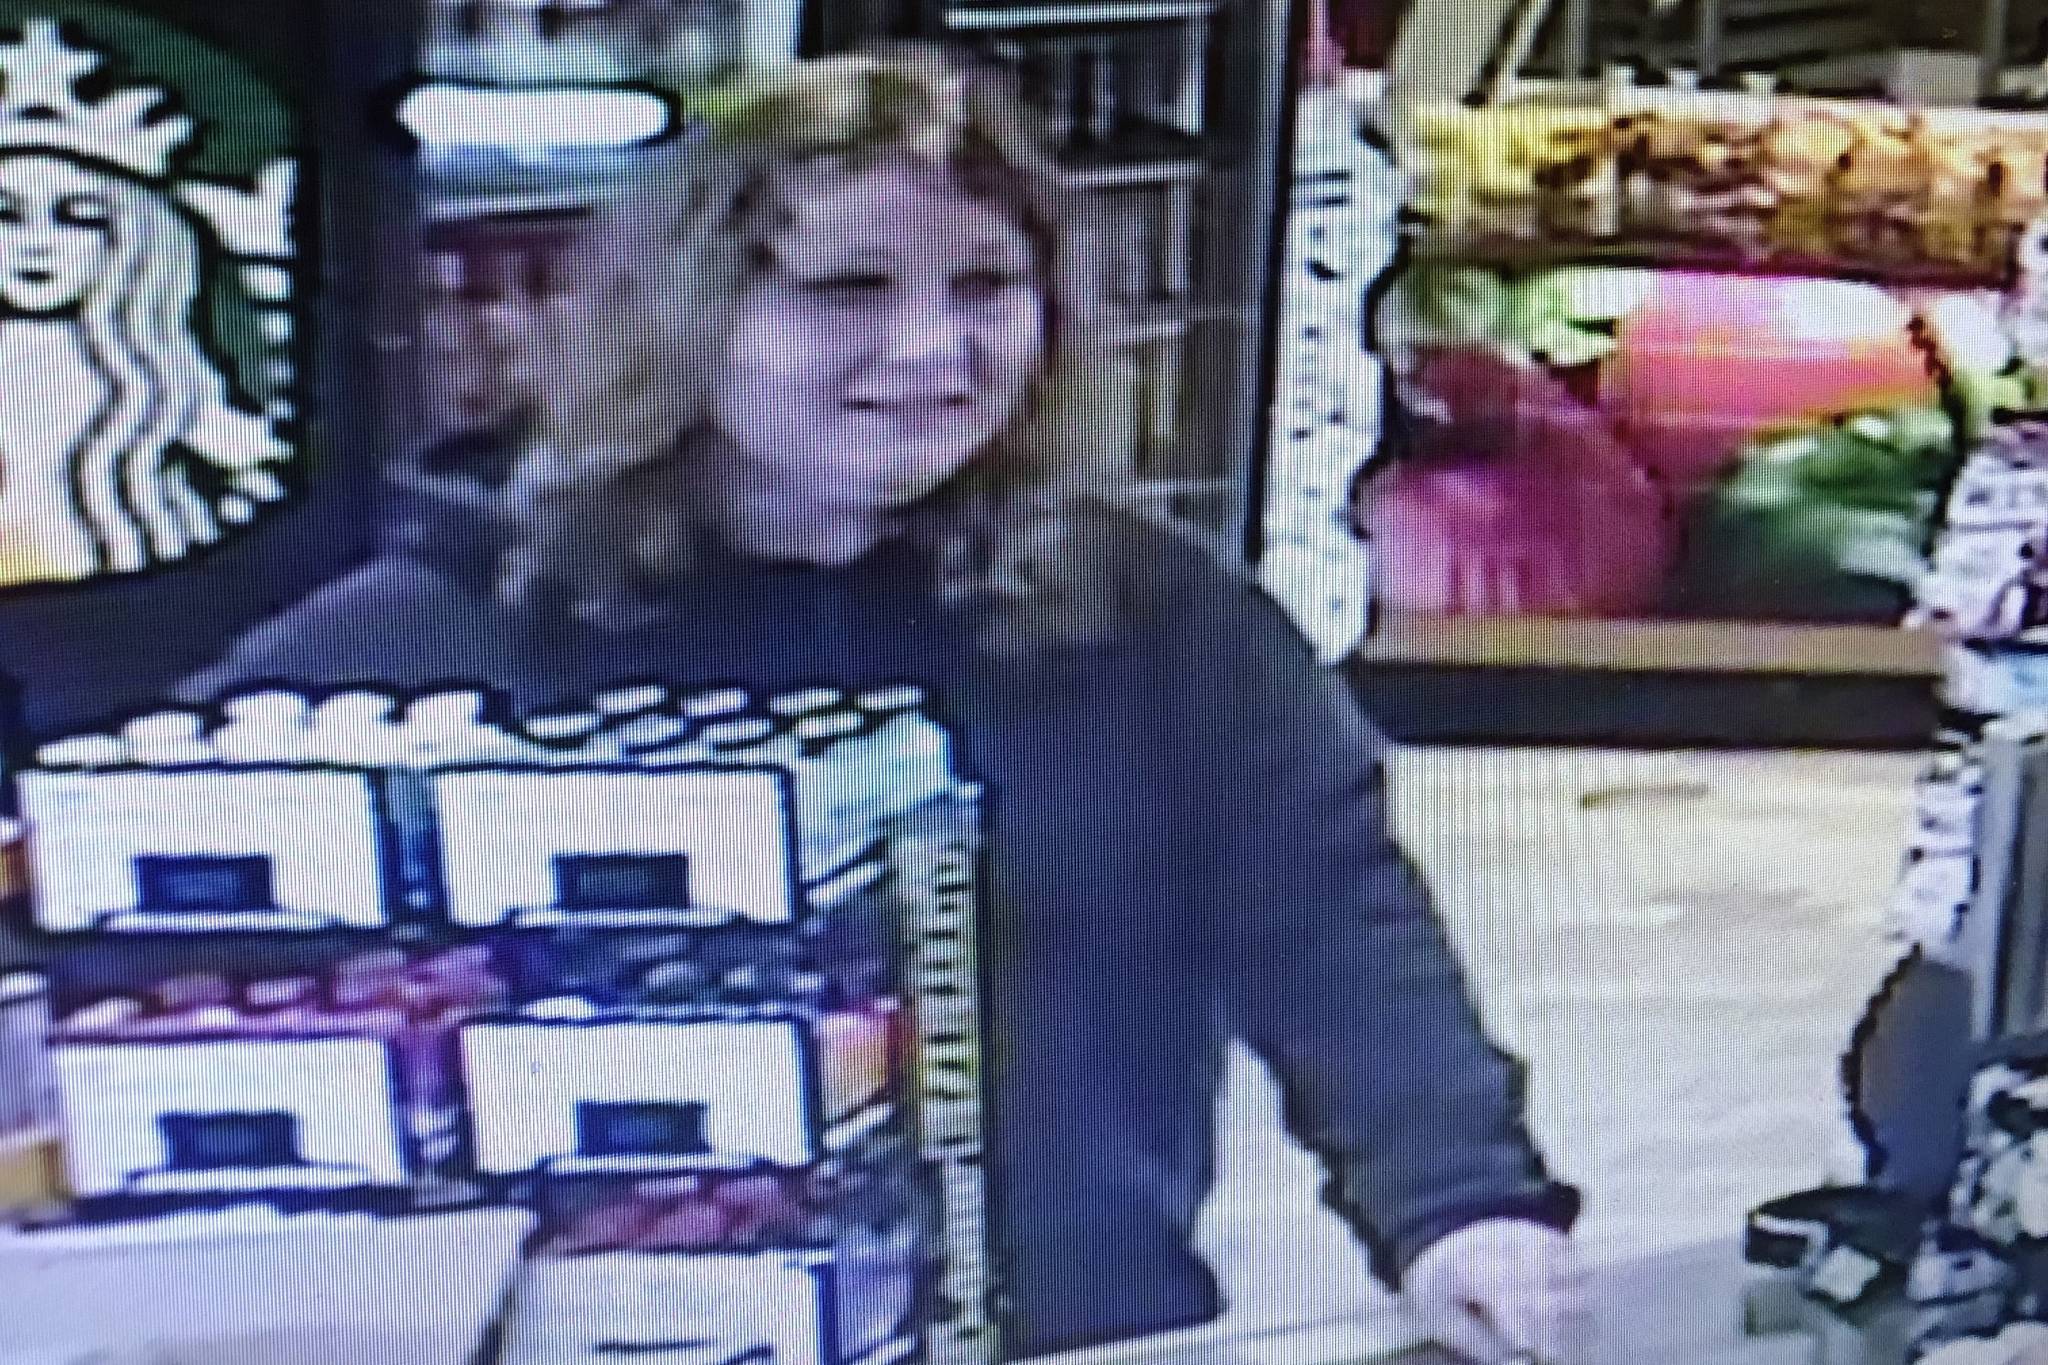 Kirkland police still searching for missing woman